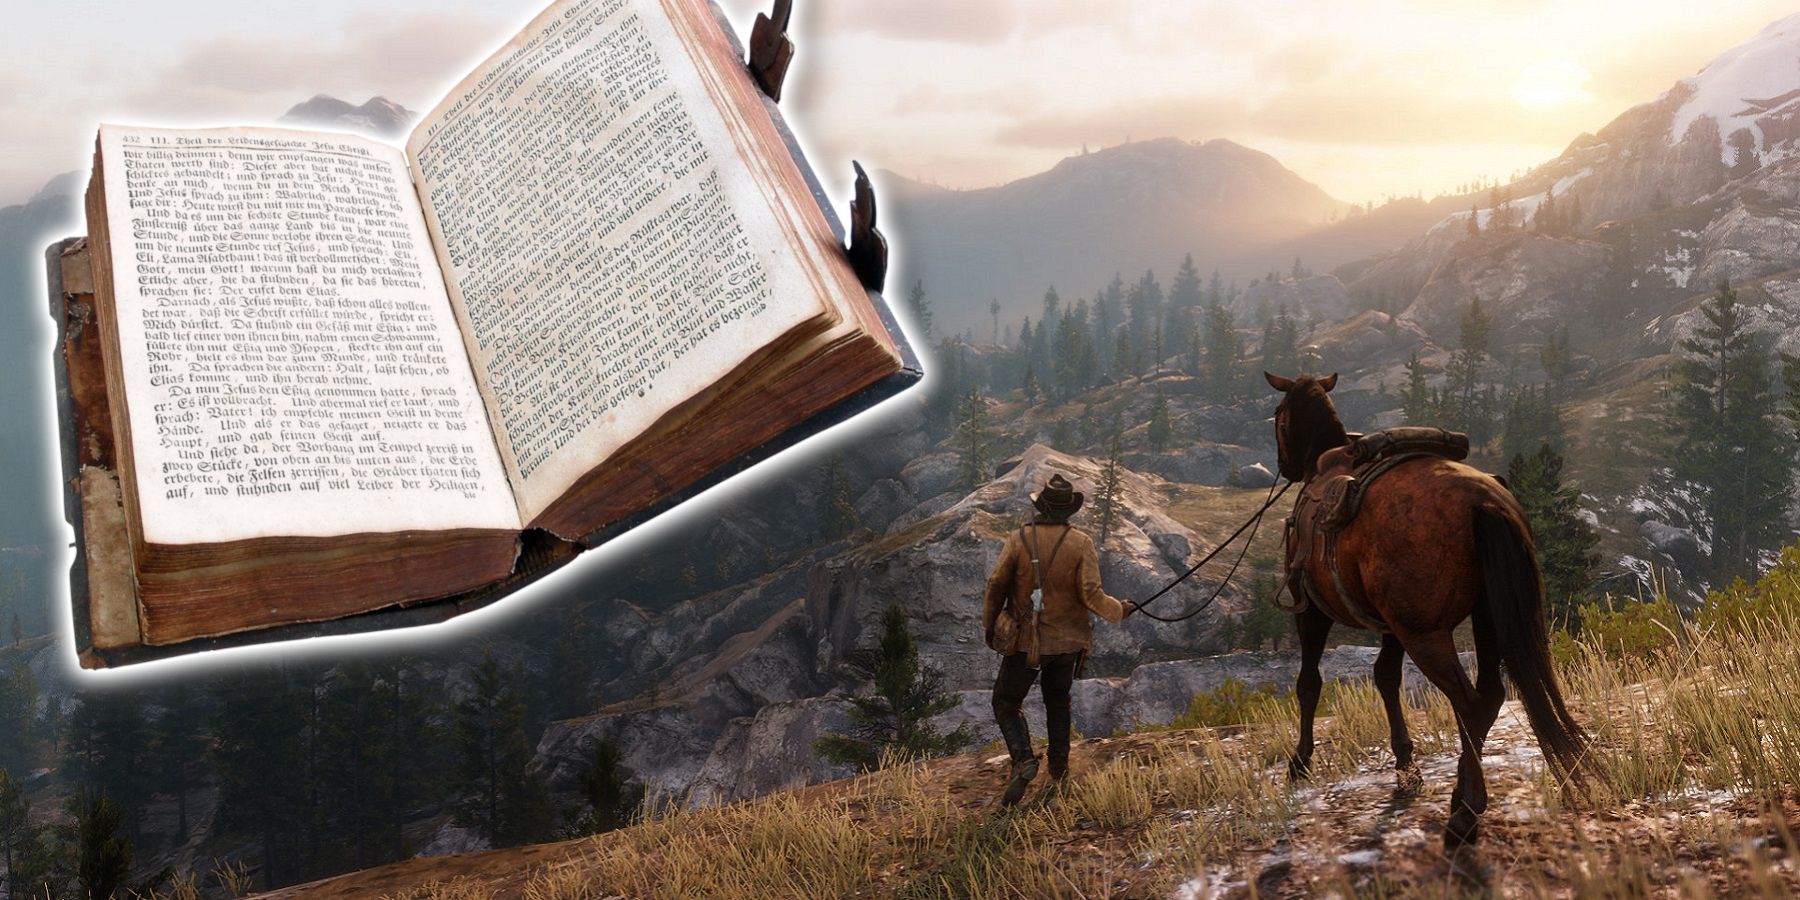 Image from Red Dead Redmrption 2 showing Arthur Morgan looking into a valley with a giant floating book in the air.